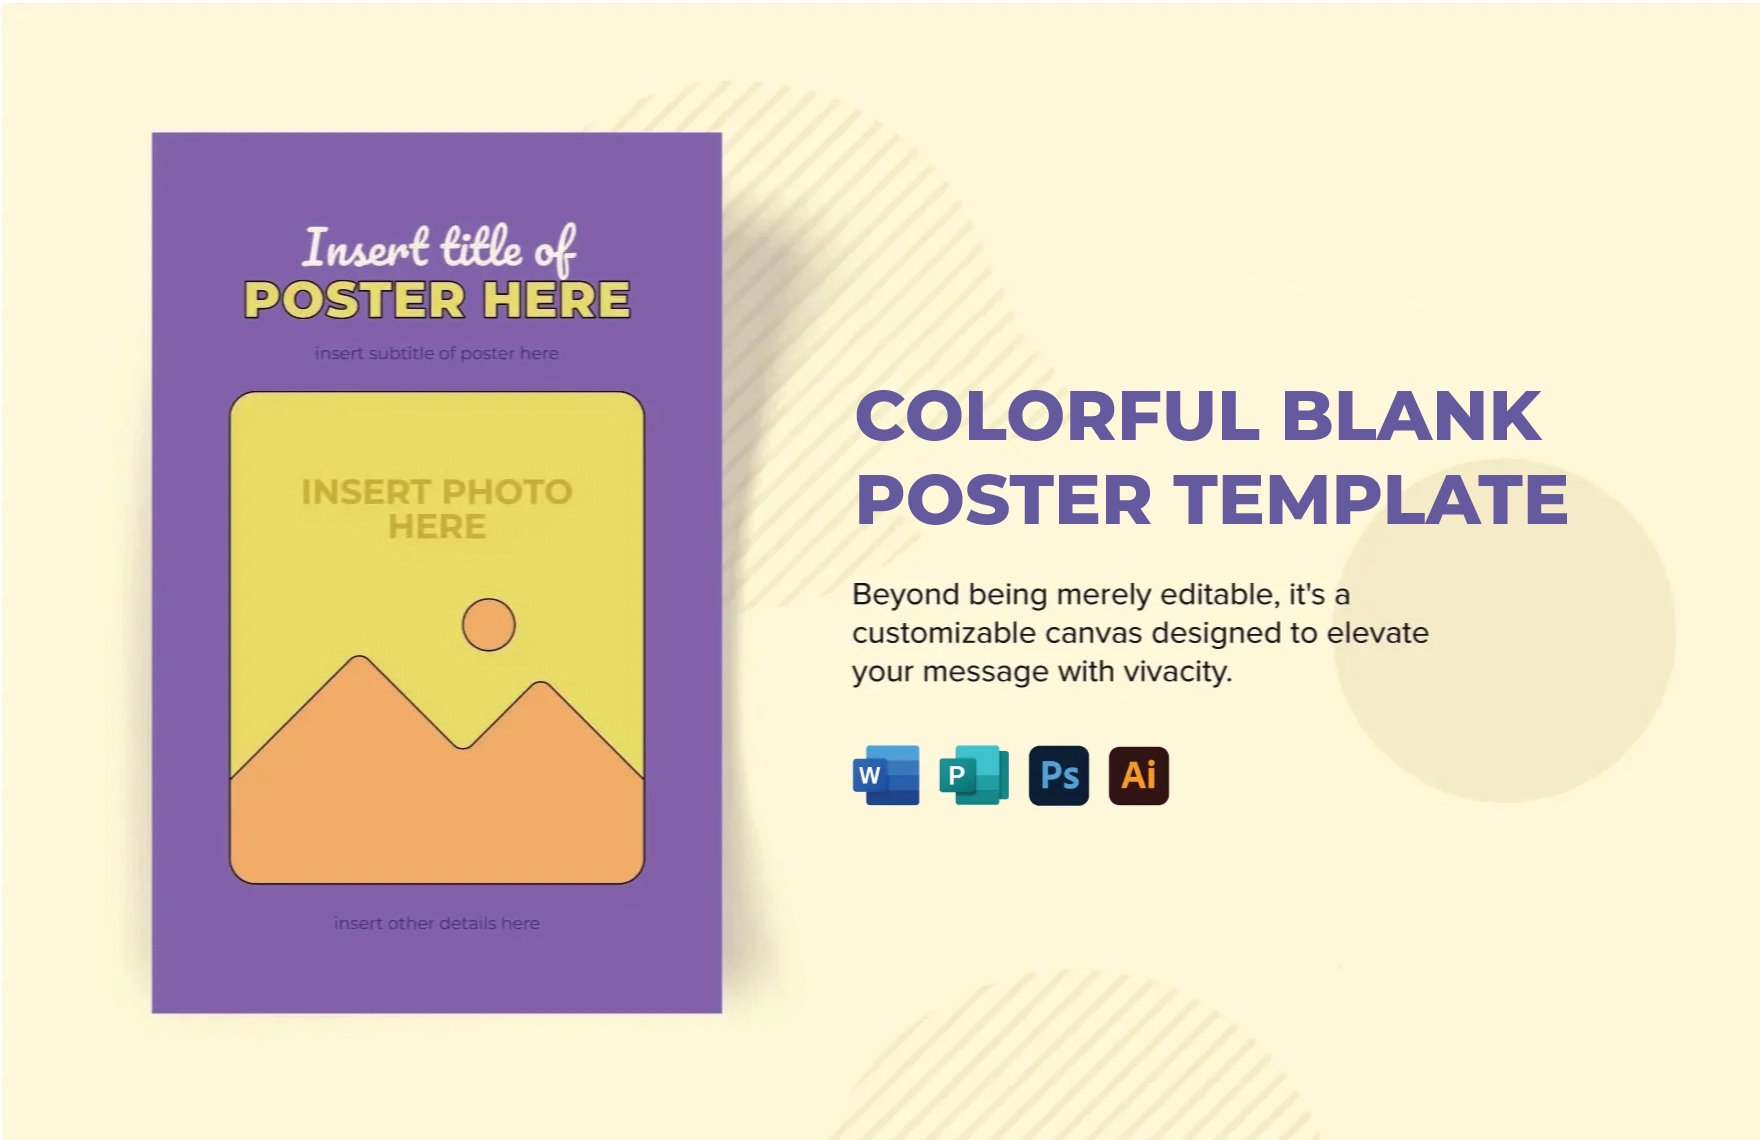 Free Colorful Blank Poster Template in Word, Illustrator, PSD, Publisher